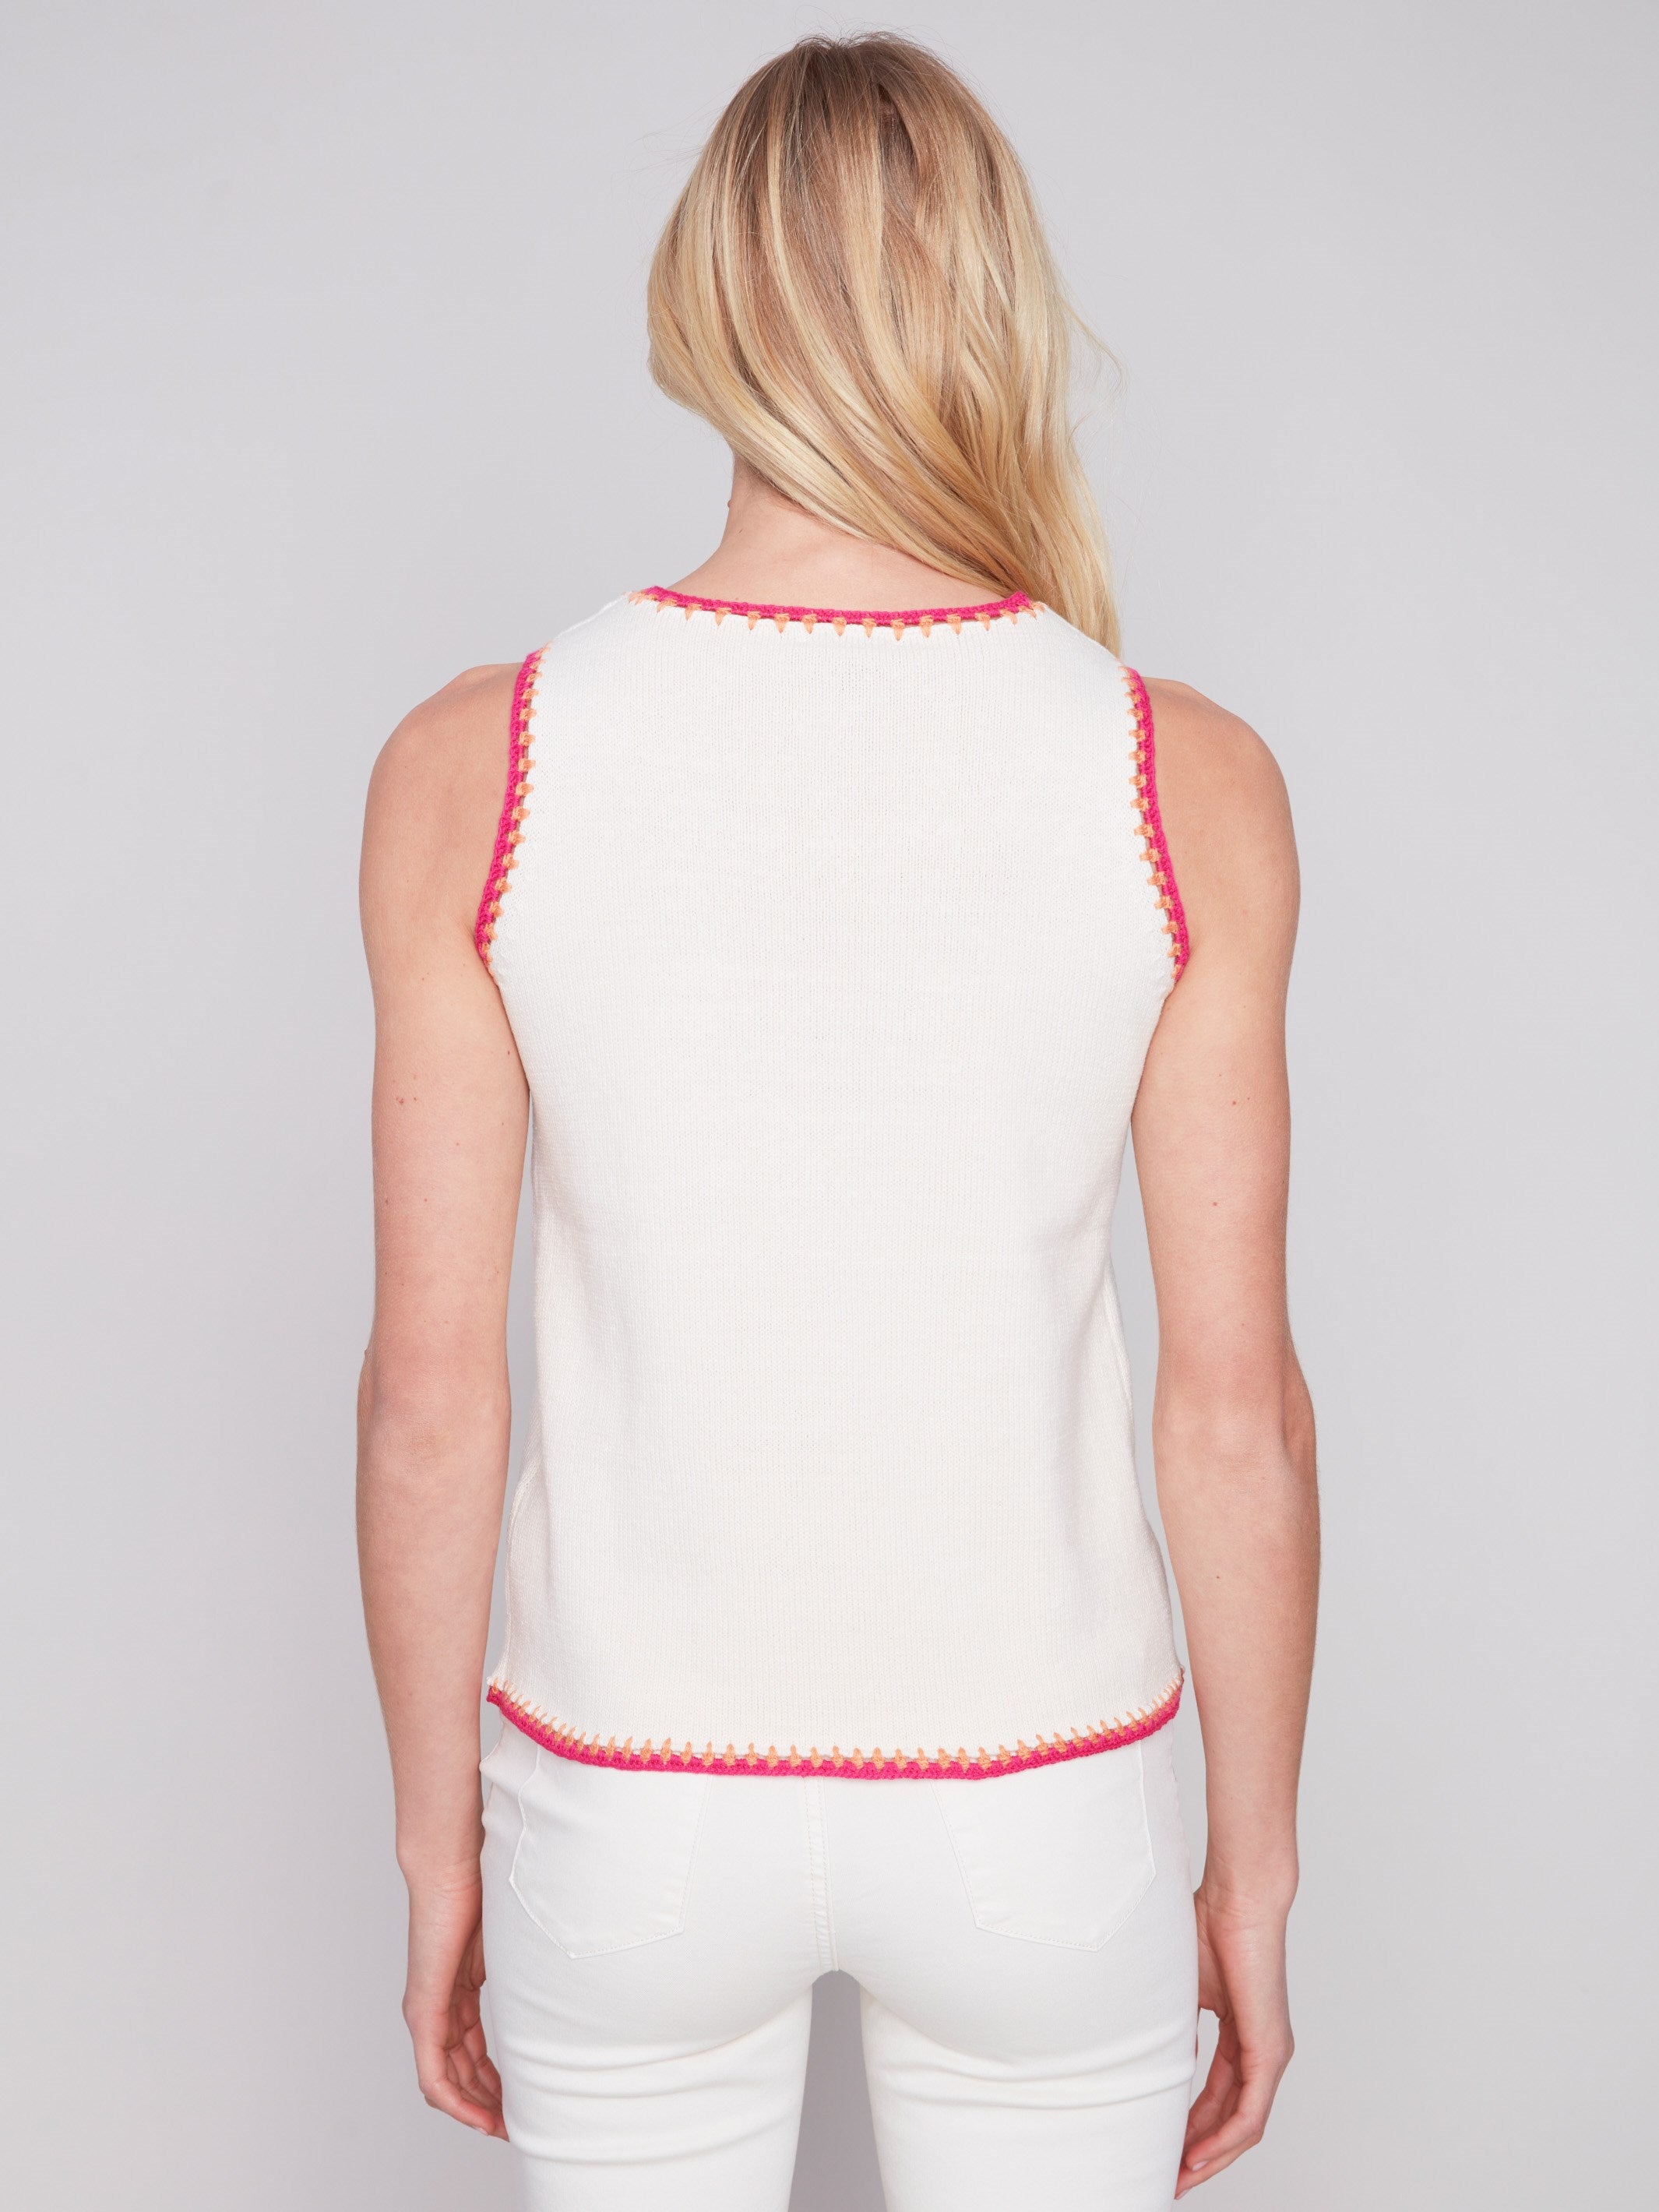 Charlie B Sleeveless Knit Top with Crochet Detail - Natural - Image 2